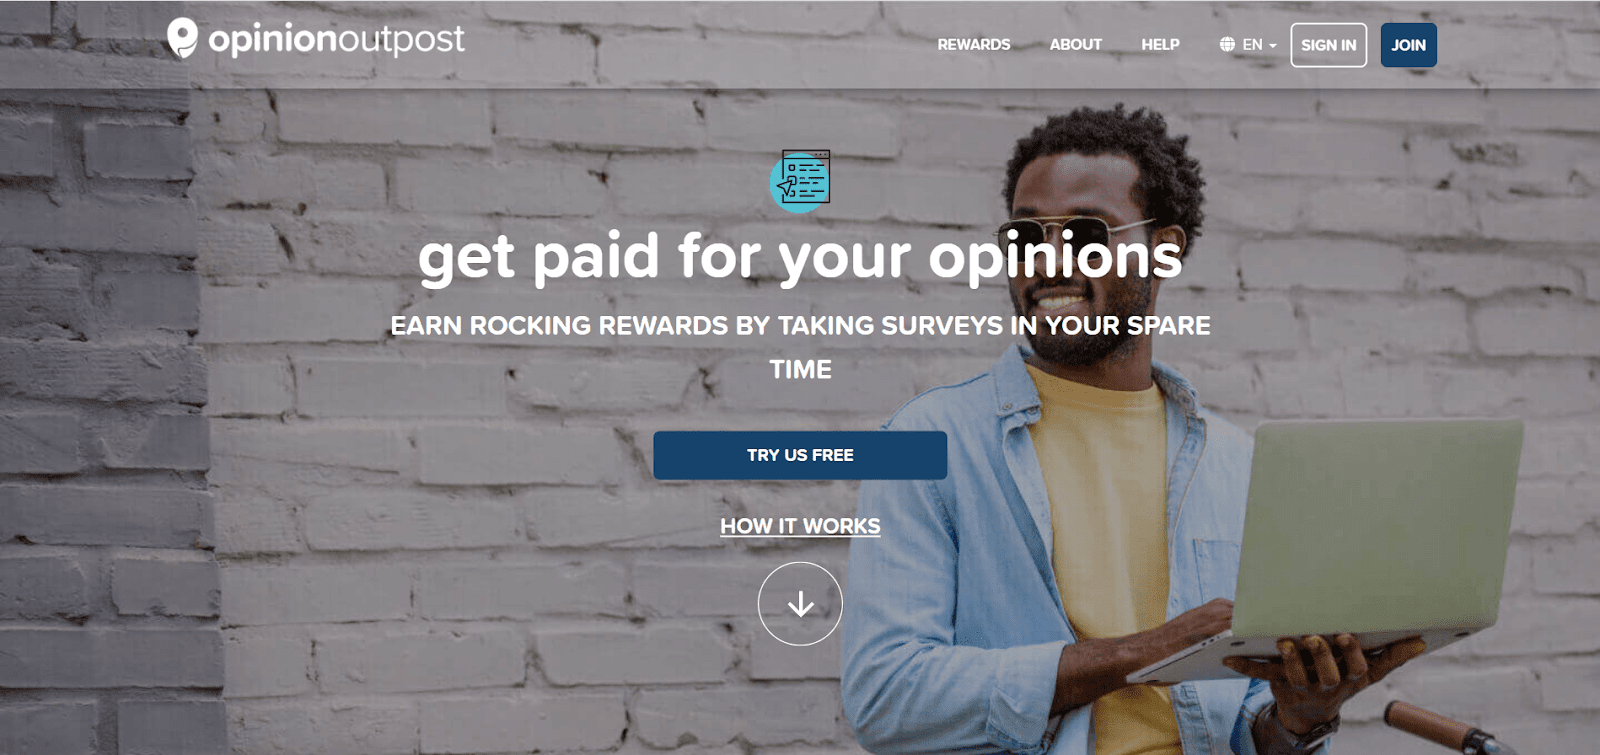 Get paid for your opinions with opinion outpost